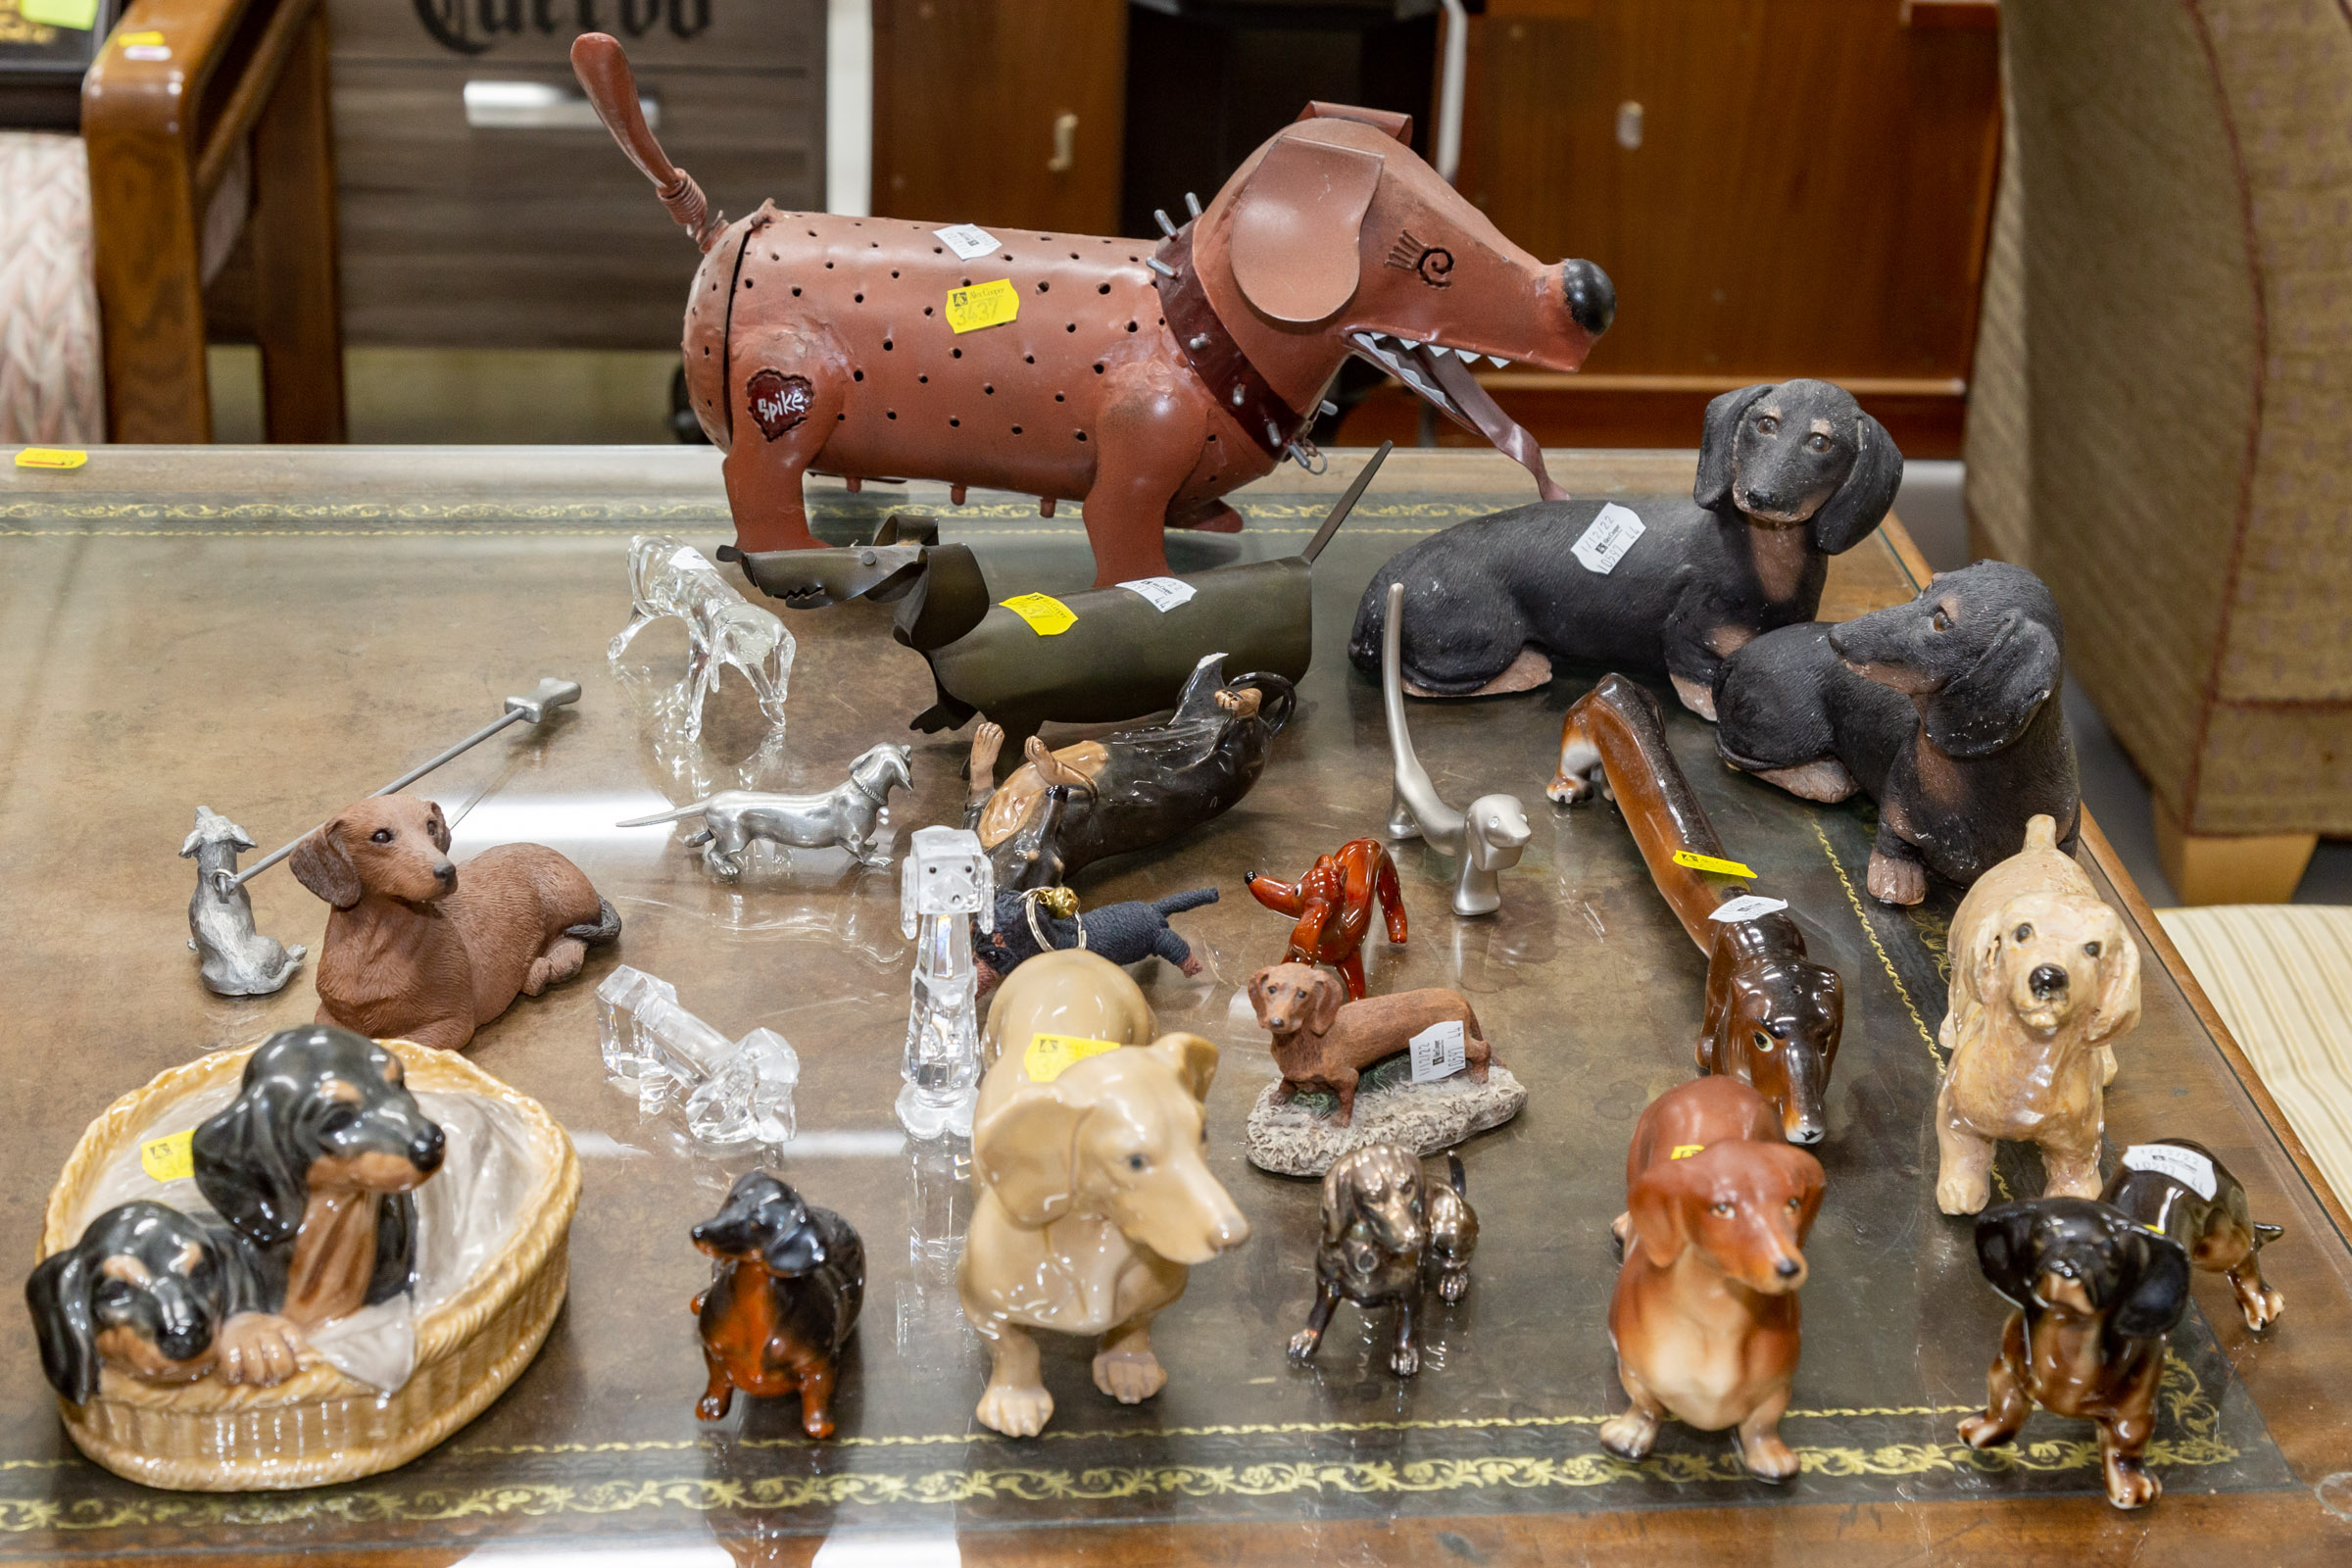 COLLECTION OF DACHSHUND FIGURINES 3383ba